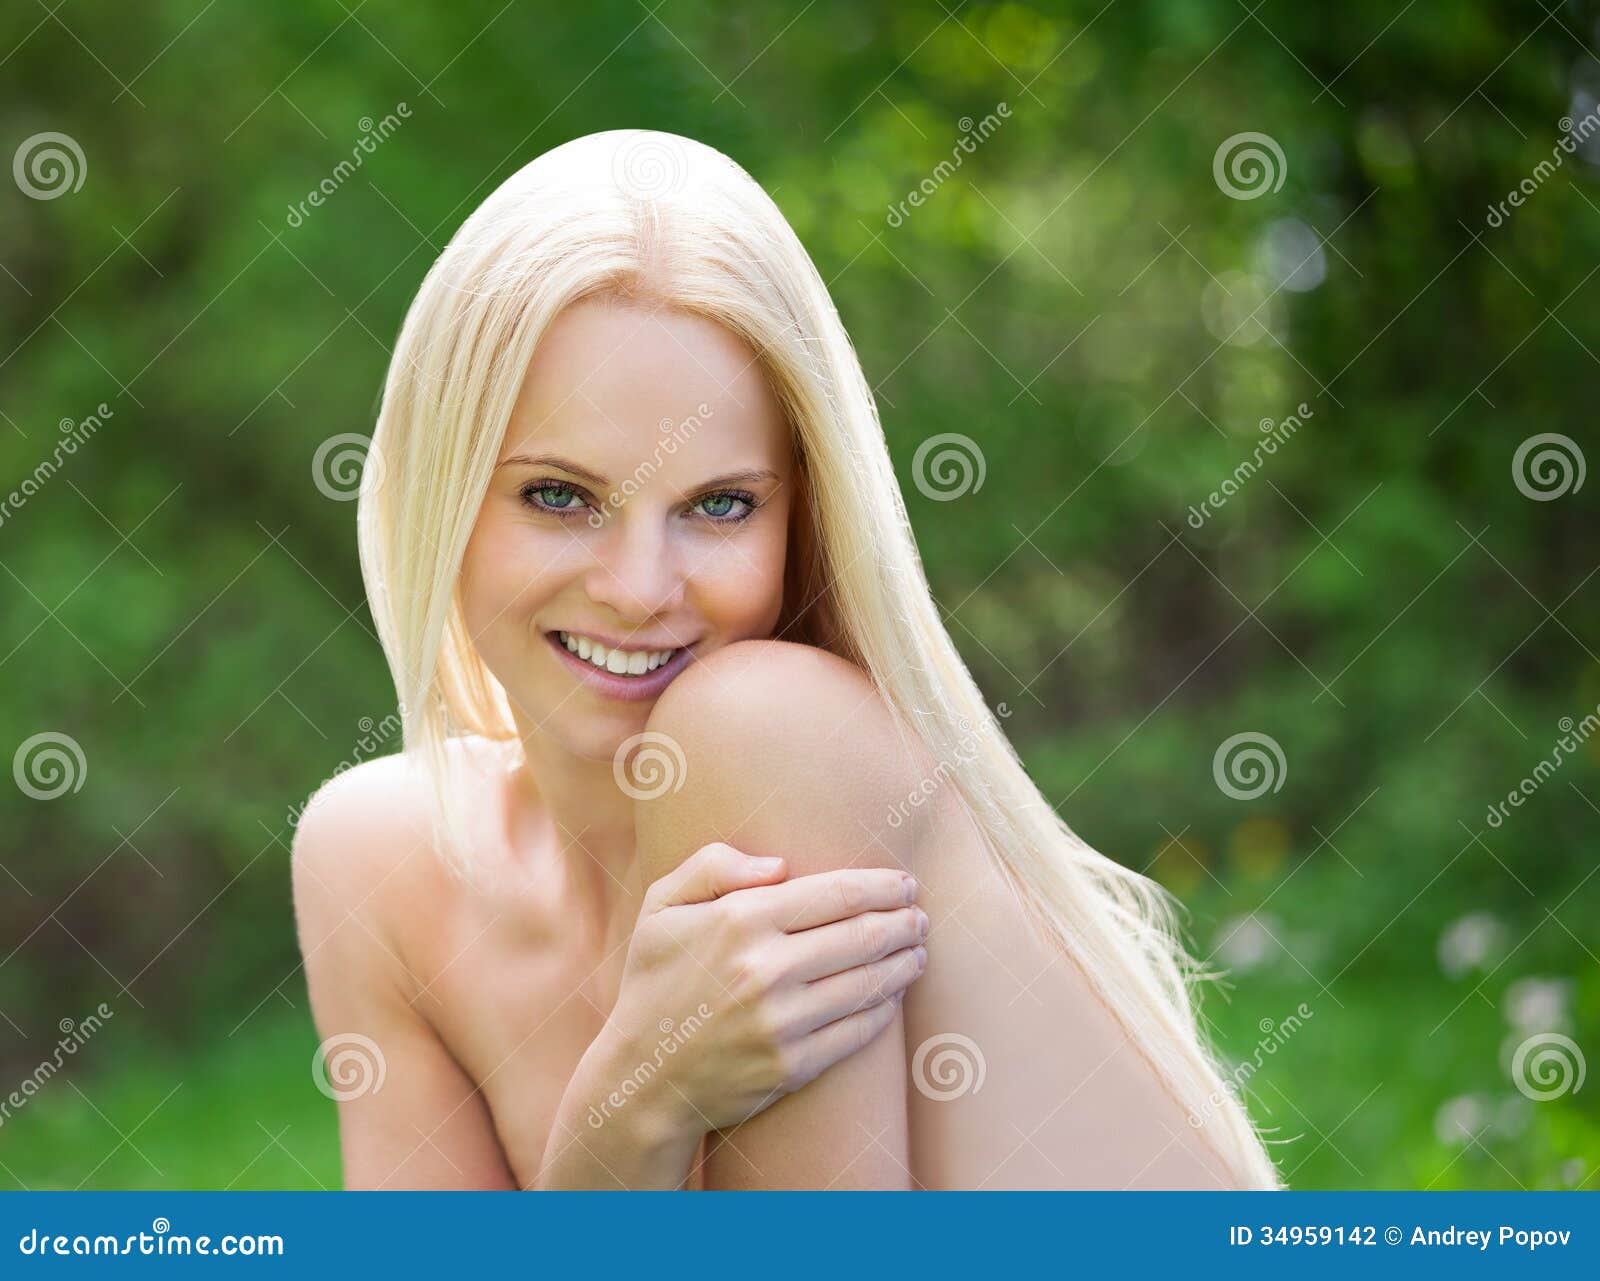 periode Ritual Karakter Young Topless Woman in Nature Stock Photo - Image of leisure, hand: 34959142